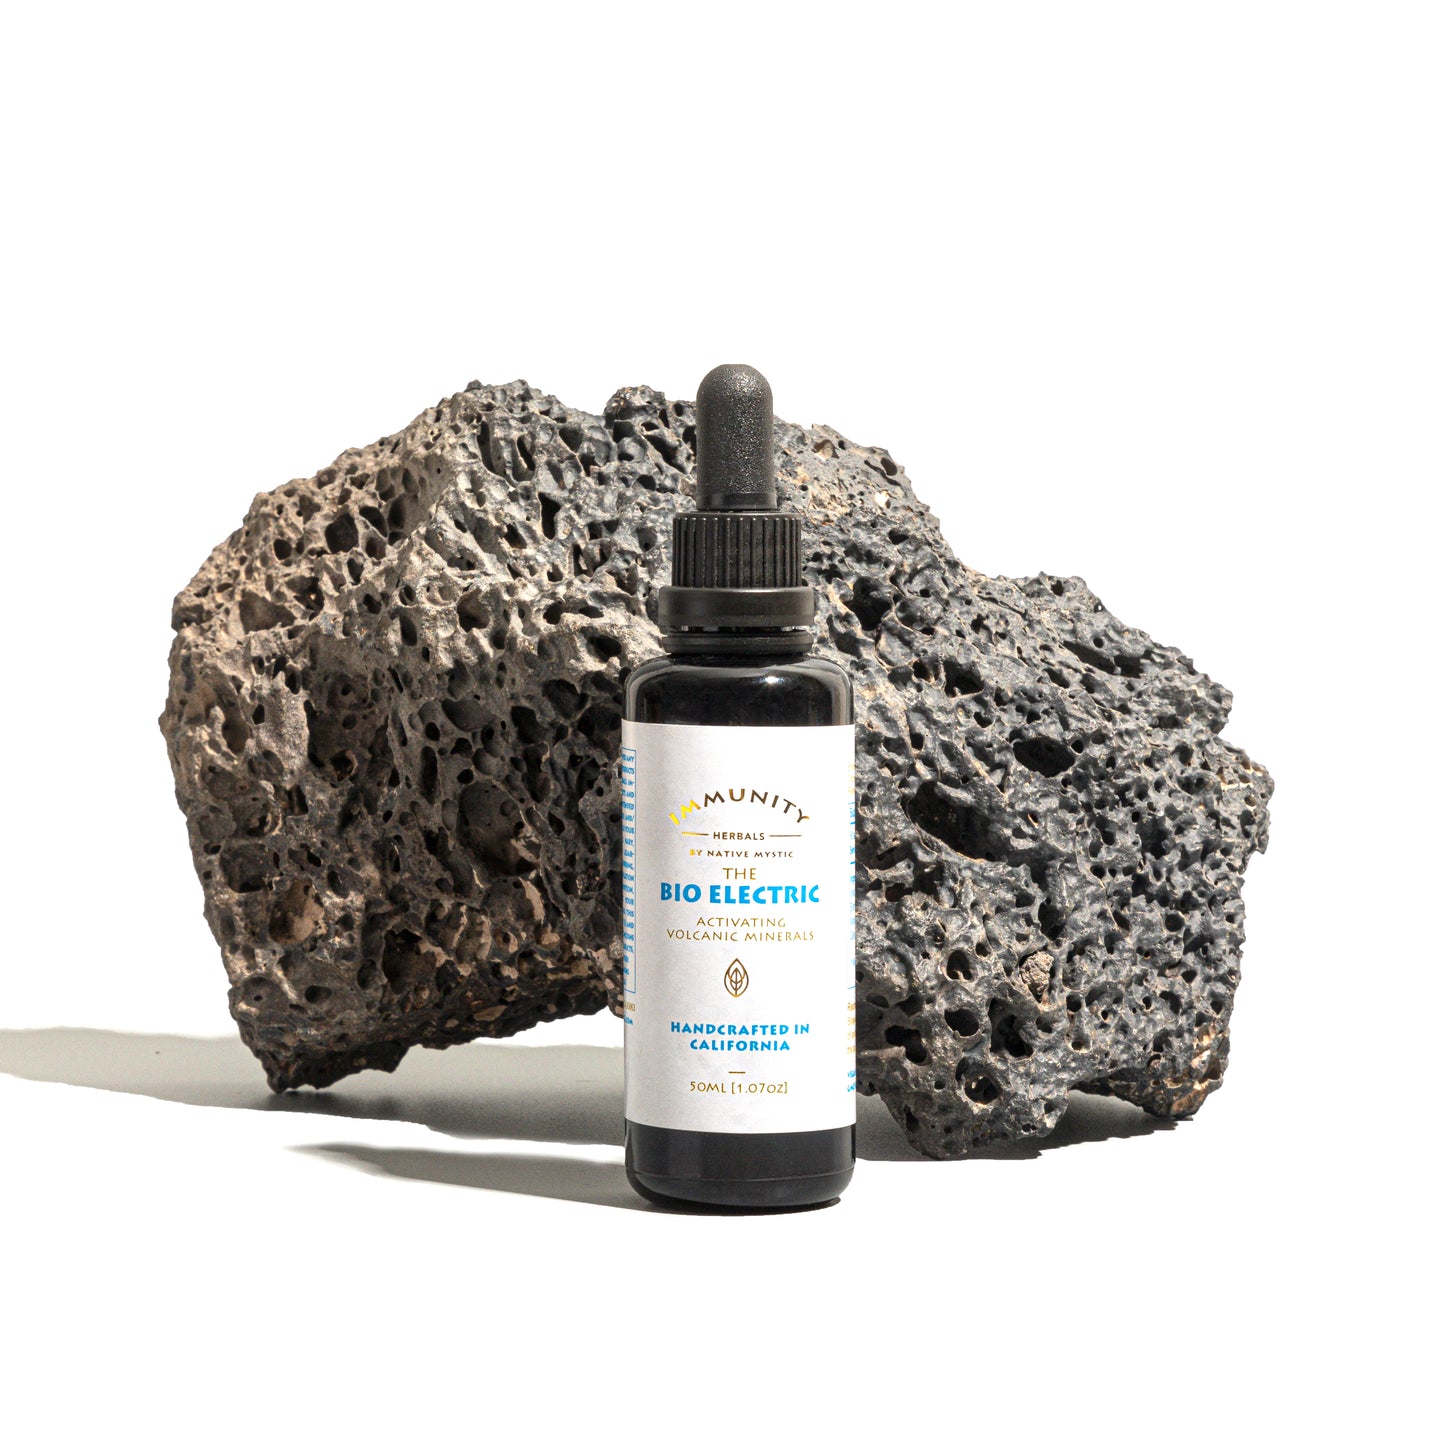 The BIO ELECTRIC | Activating & Alkalizing Volcanic Minerals